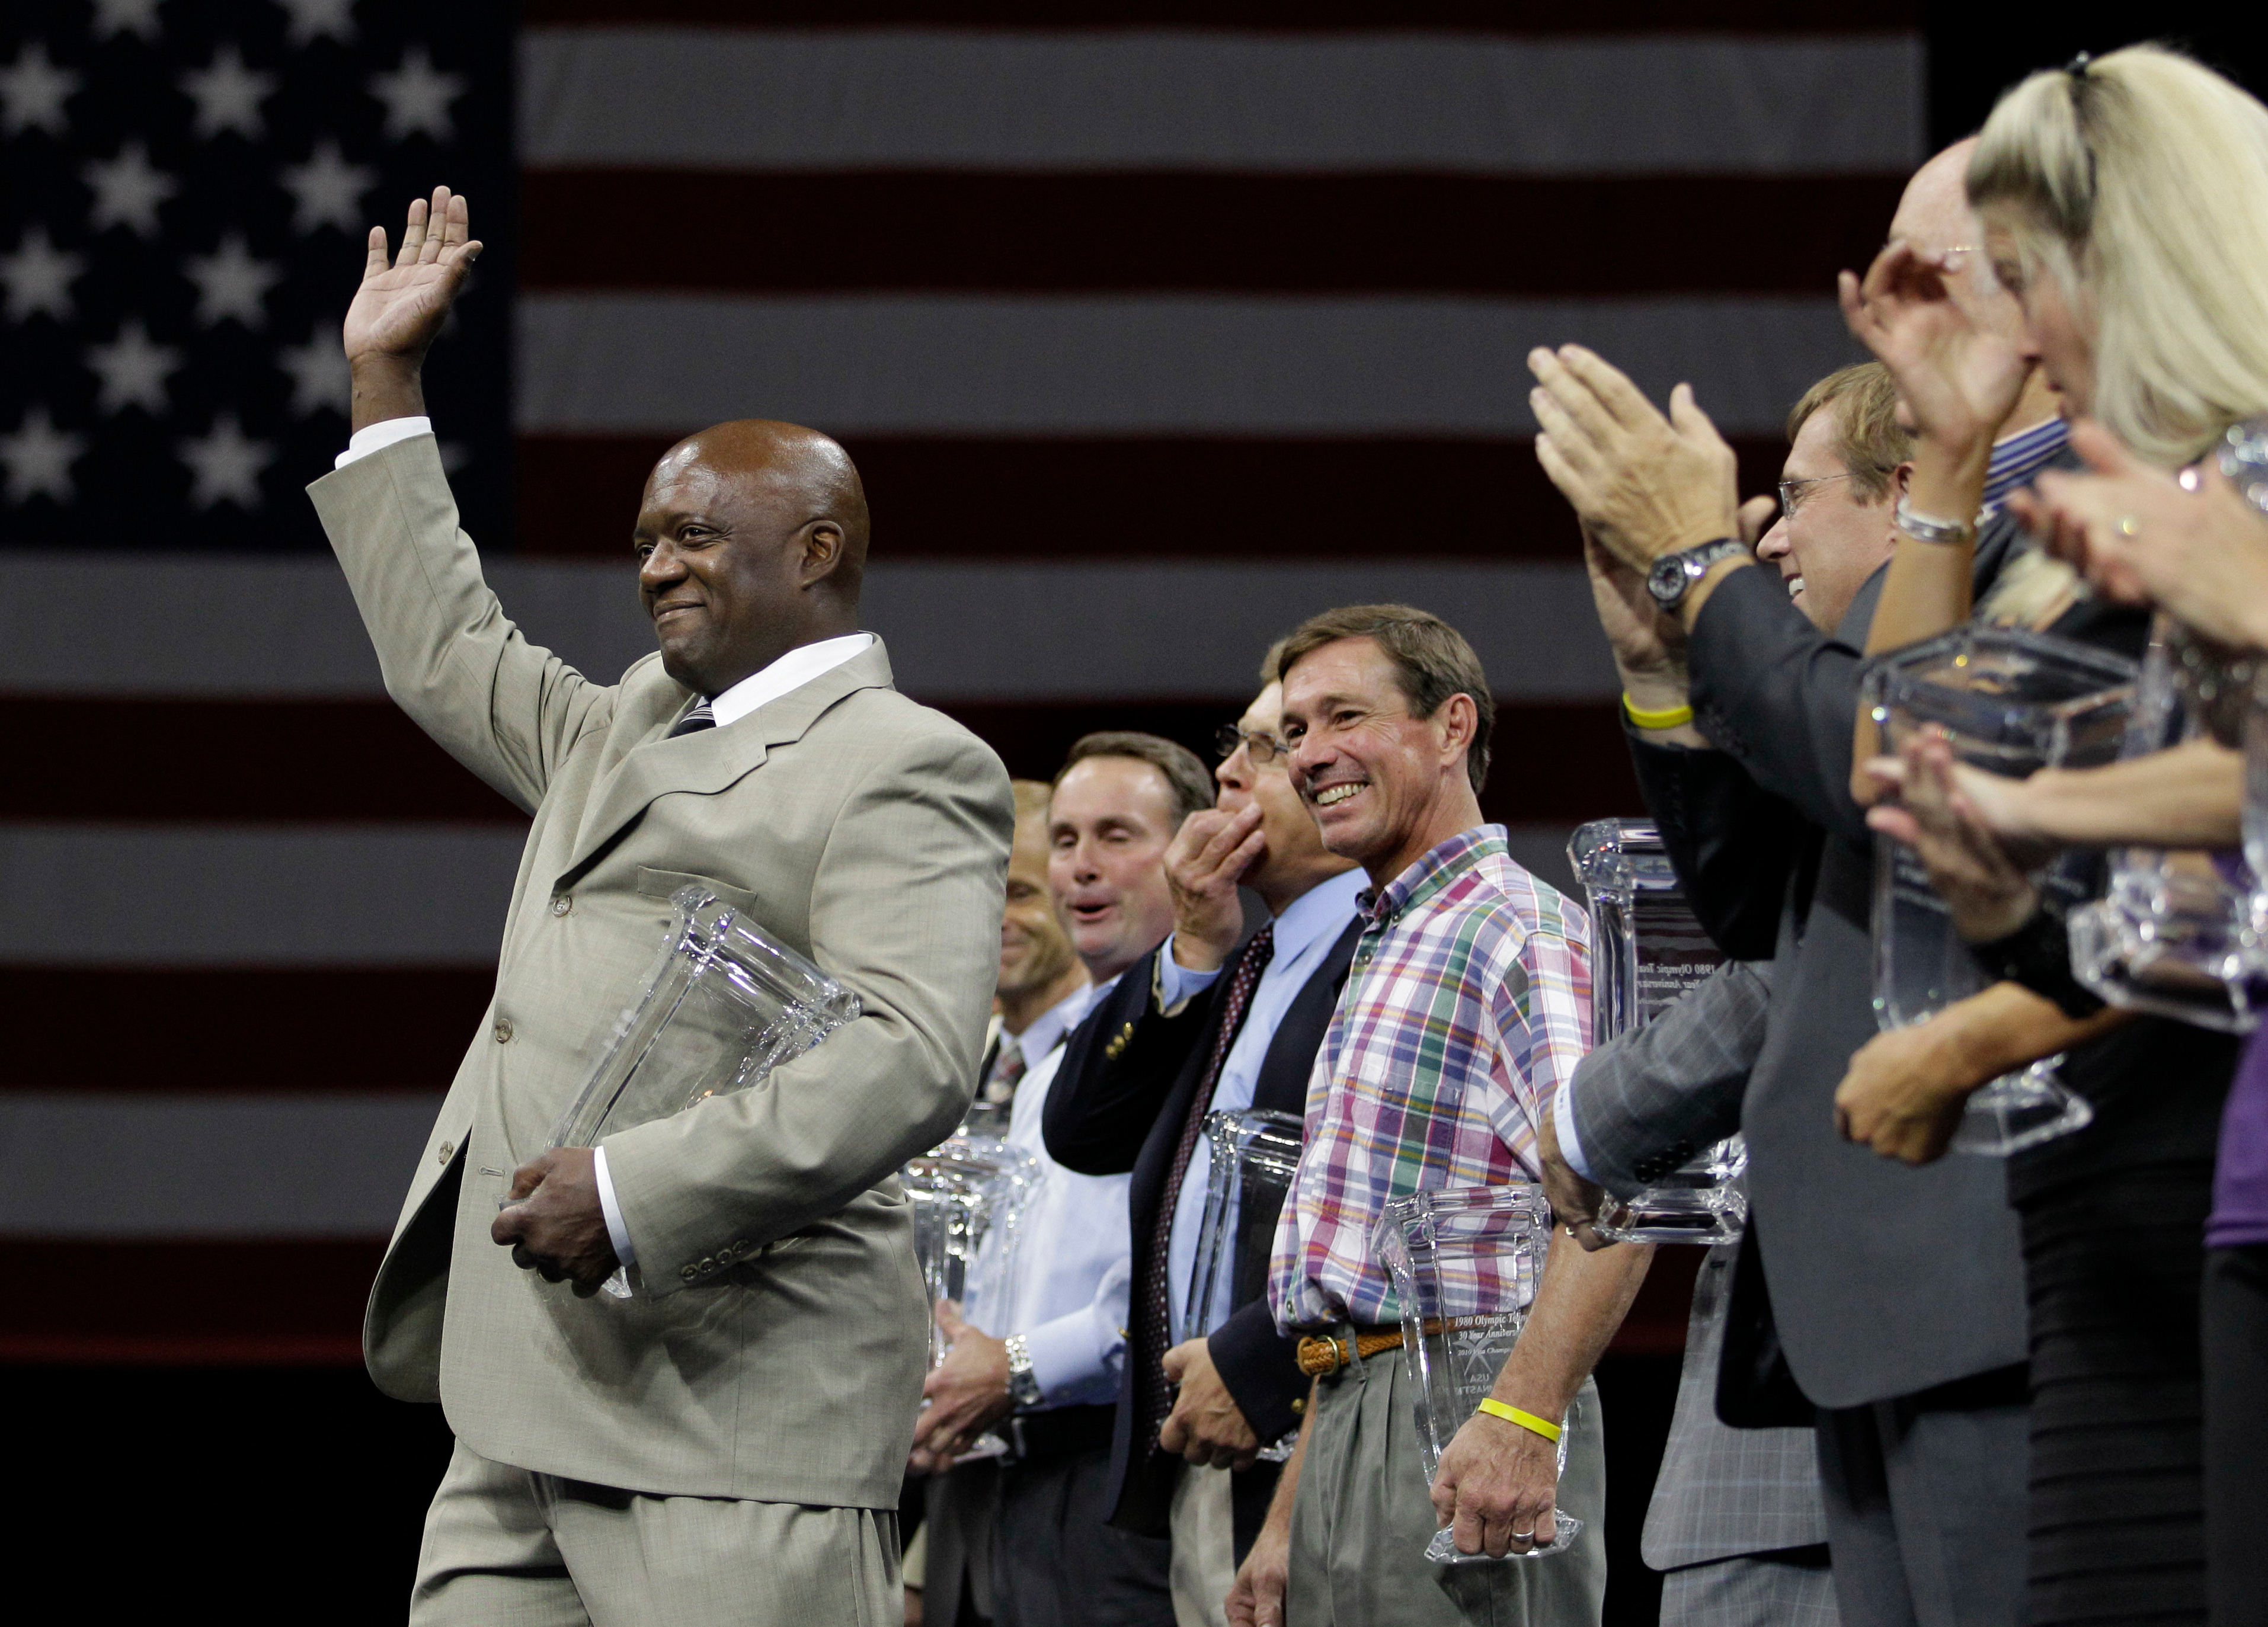 Ron Galimore waves to the crowd as he and others from the 1980 Olympic gymnastics team who did not compete due to the U.S. boycott of the Olympic Games, are honored at the U.S. Gymnastics Championships in Hartford, Conn. on August 14, 2010. On Nov. 16, 2018 it was announced that Galimore resigned from being USA Gymnastics' COO. (Elise Amendola—AP/REX/Shutterstock)